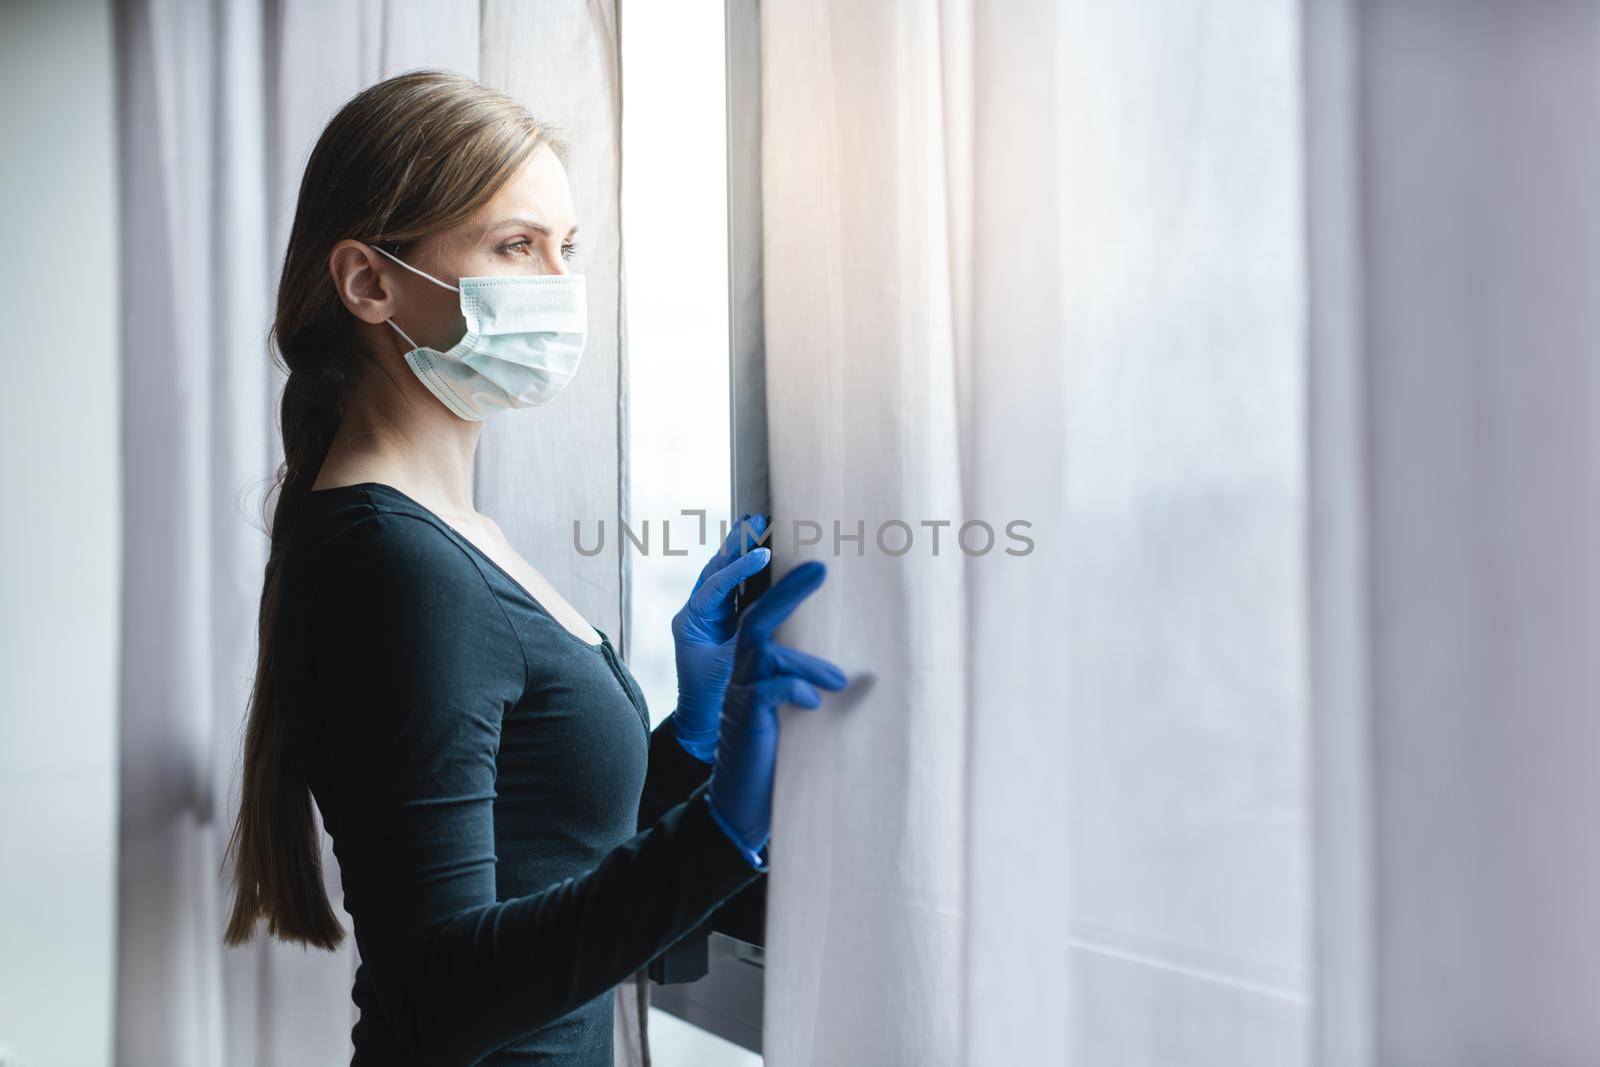 Bored woman in corona quarantine looking out of window to the street